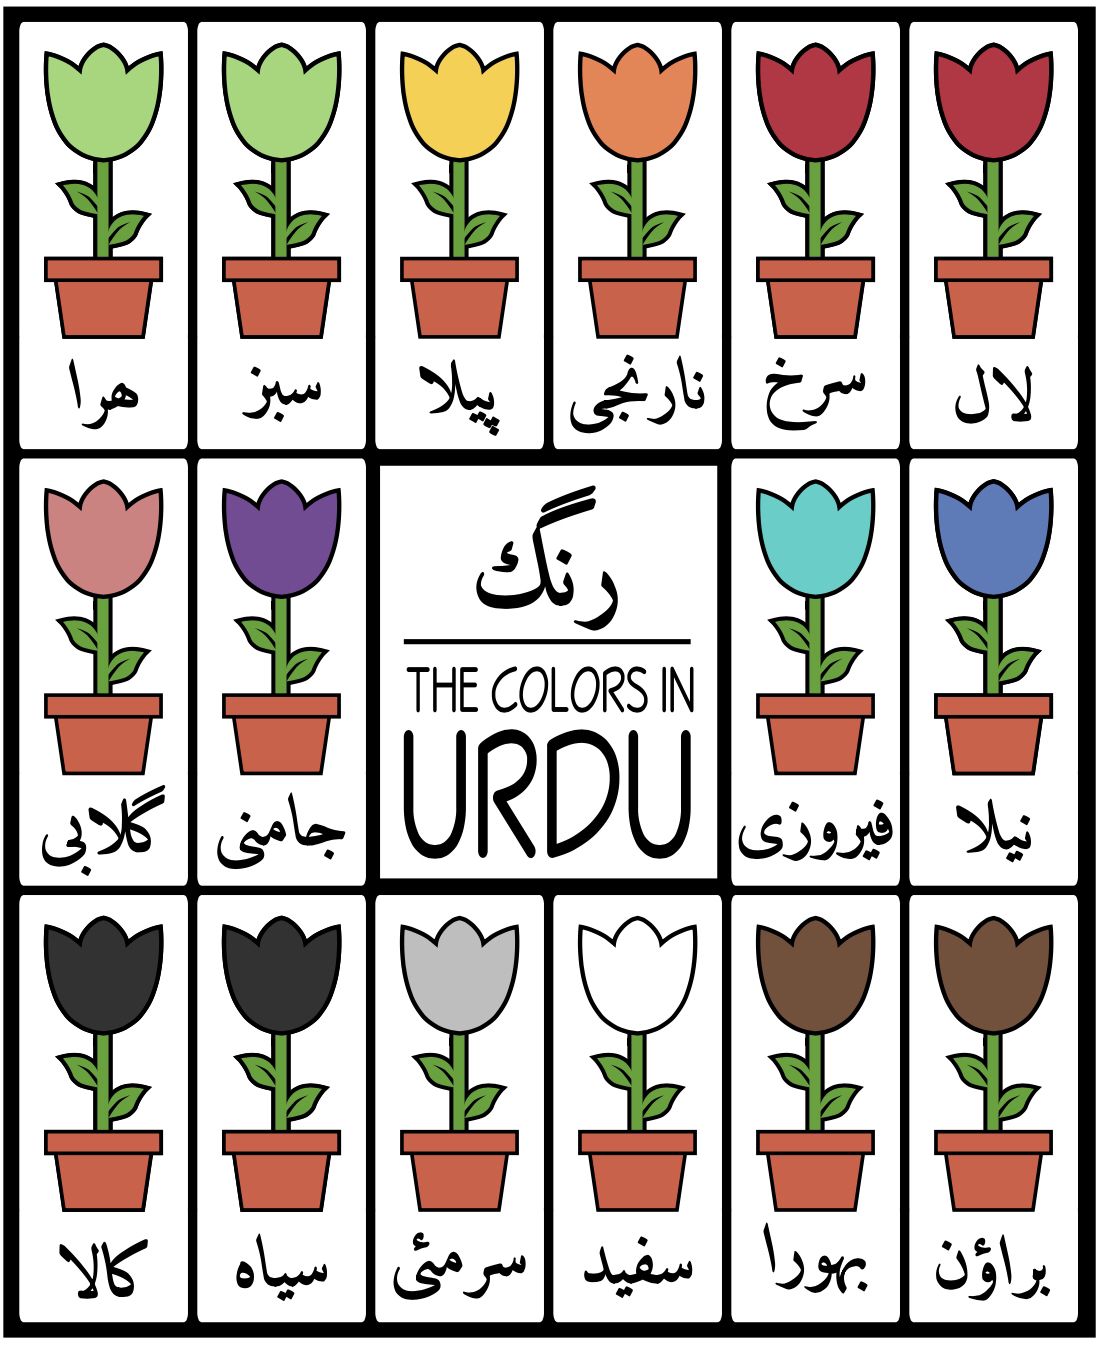 The Colors in the Urdu Language